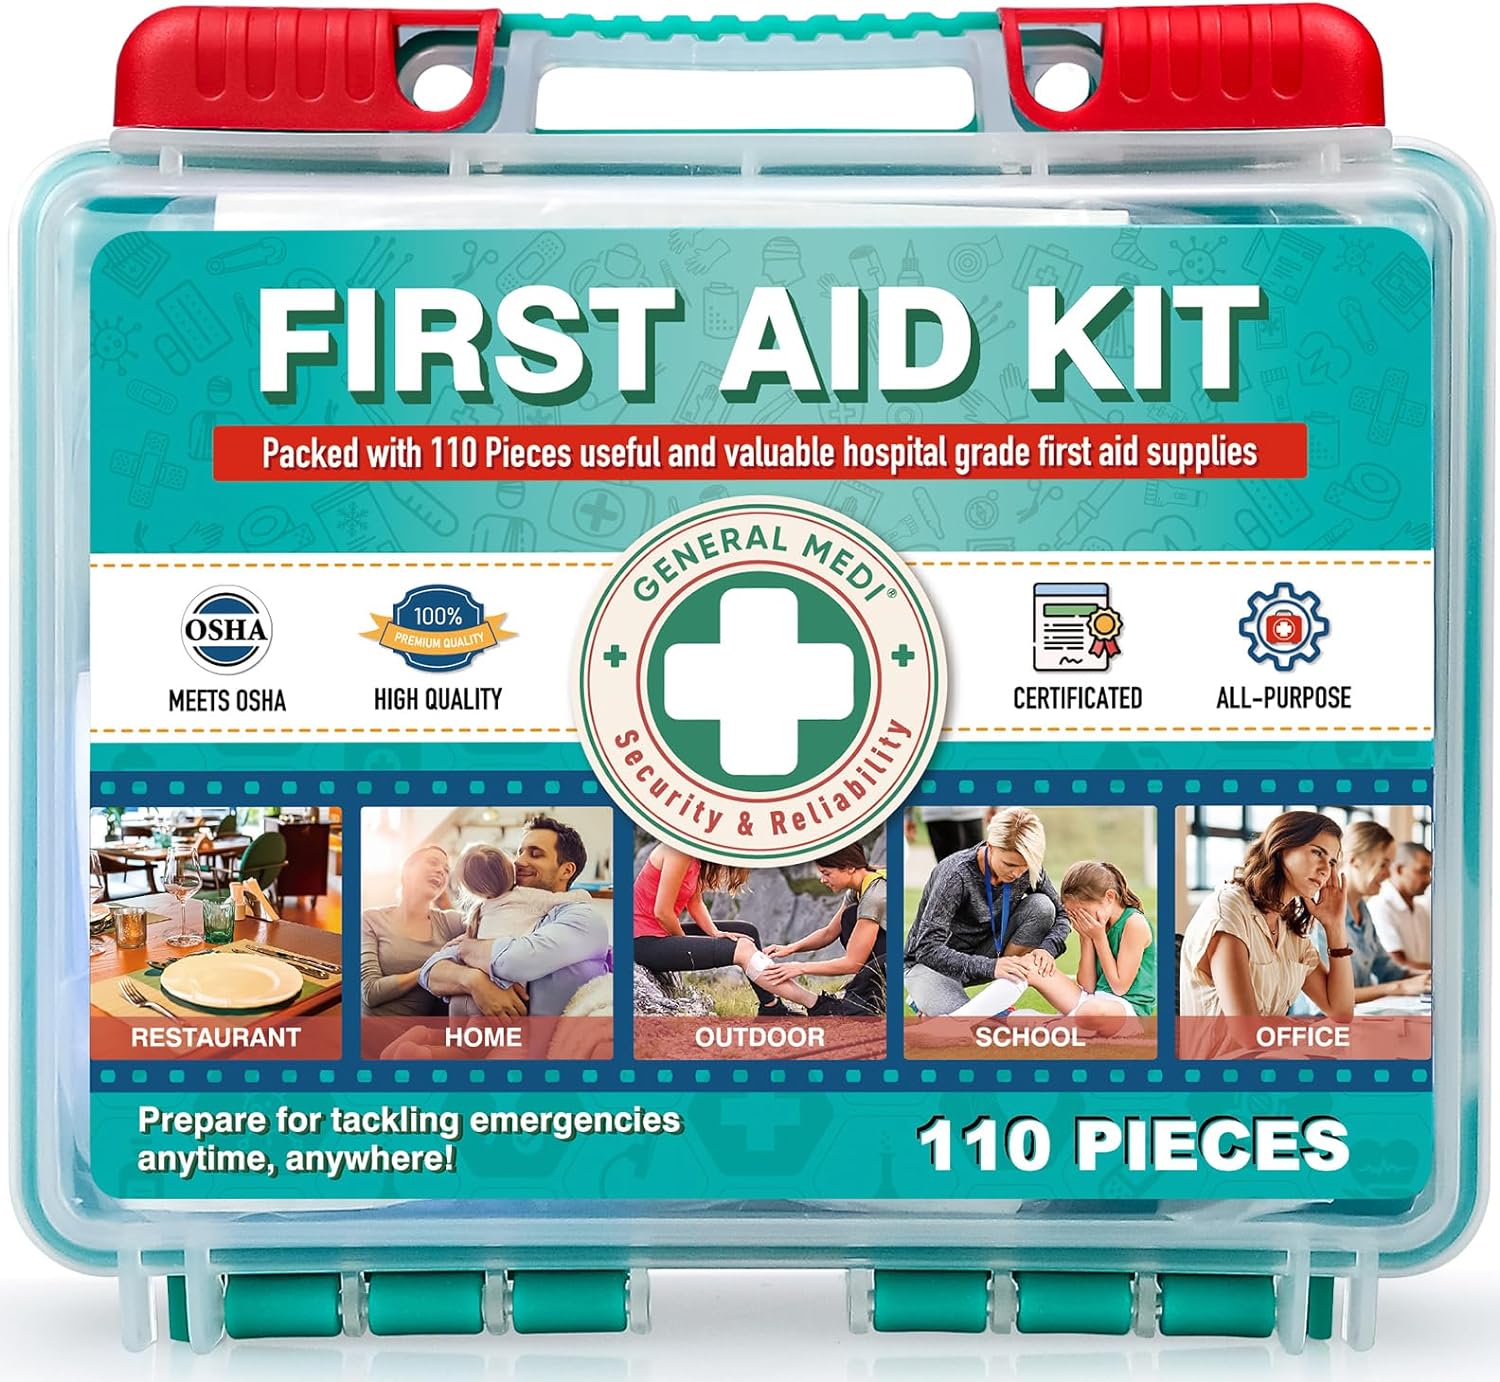 General Medi 110 Pieces Small First Aid Kit Review